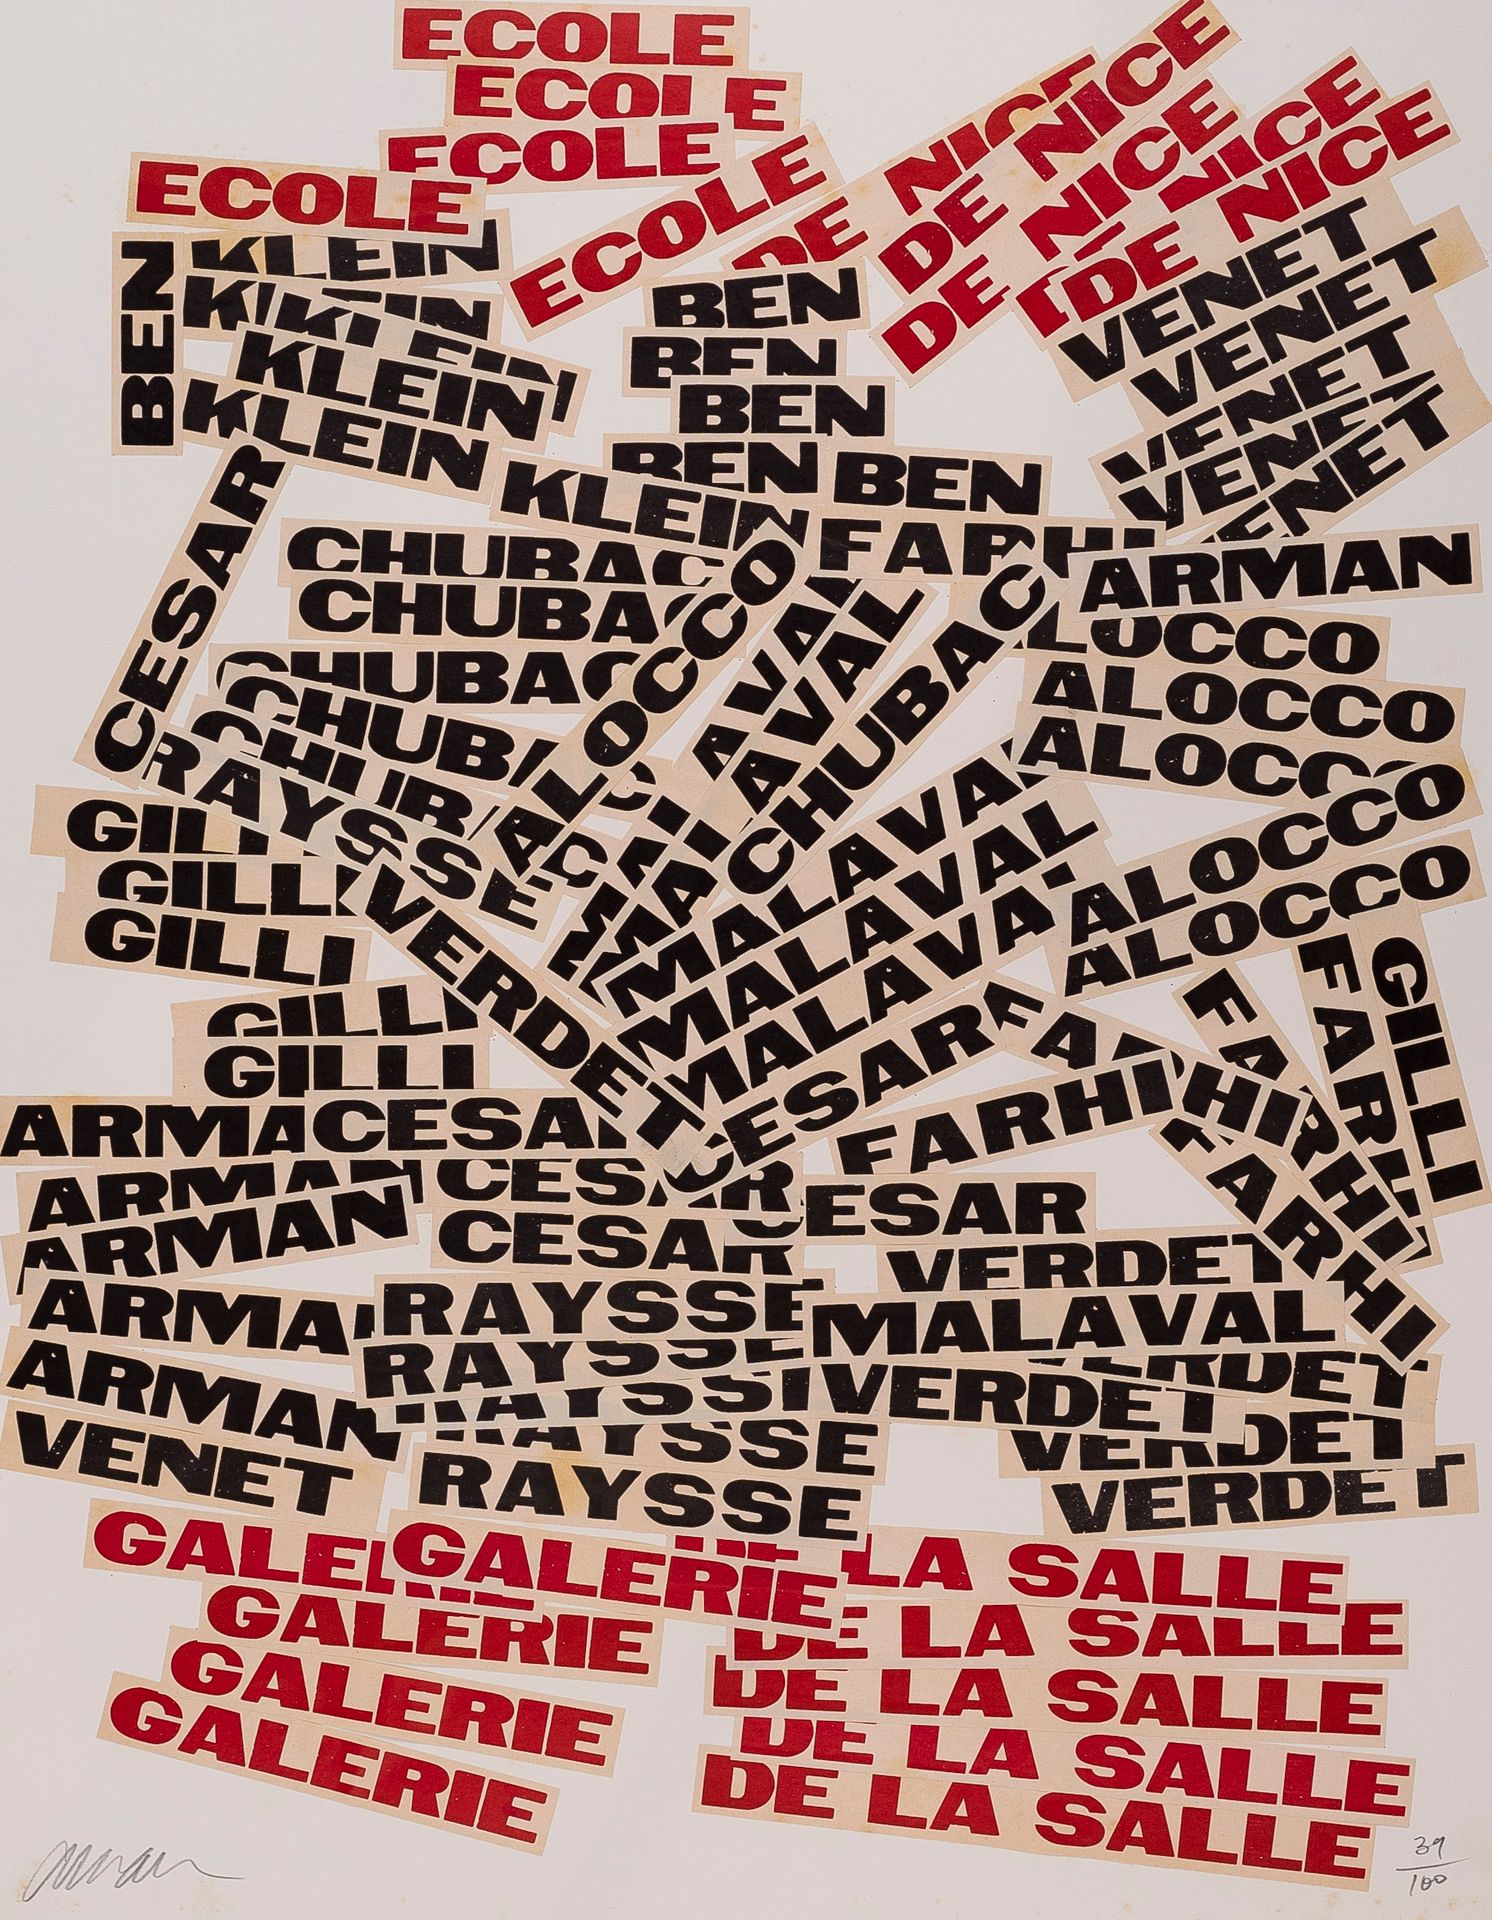 Null ARMAN (1928-2005)

School of Nice, 1972

Print with collage of labels in tw&hellip;